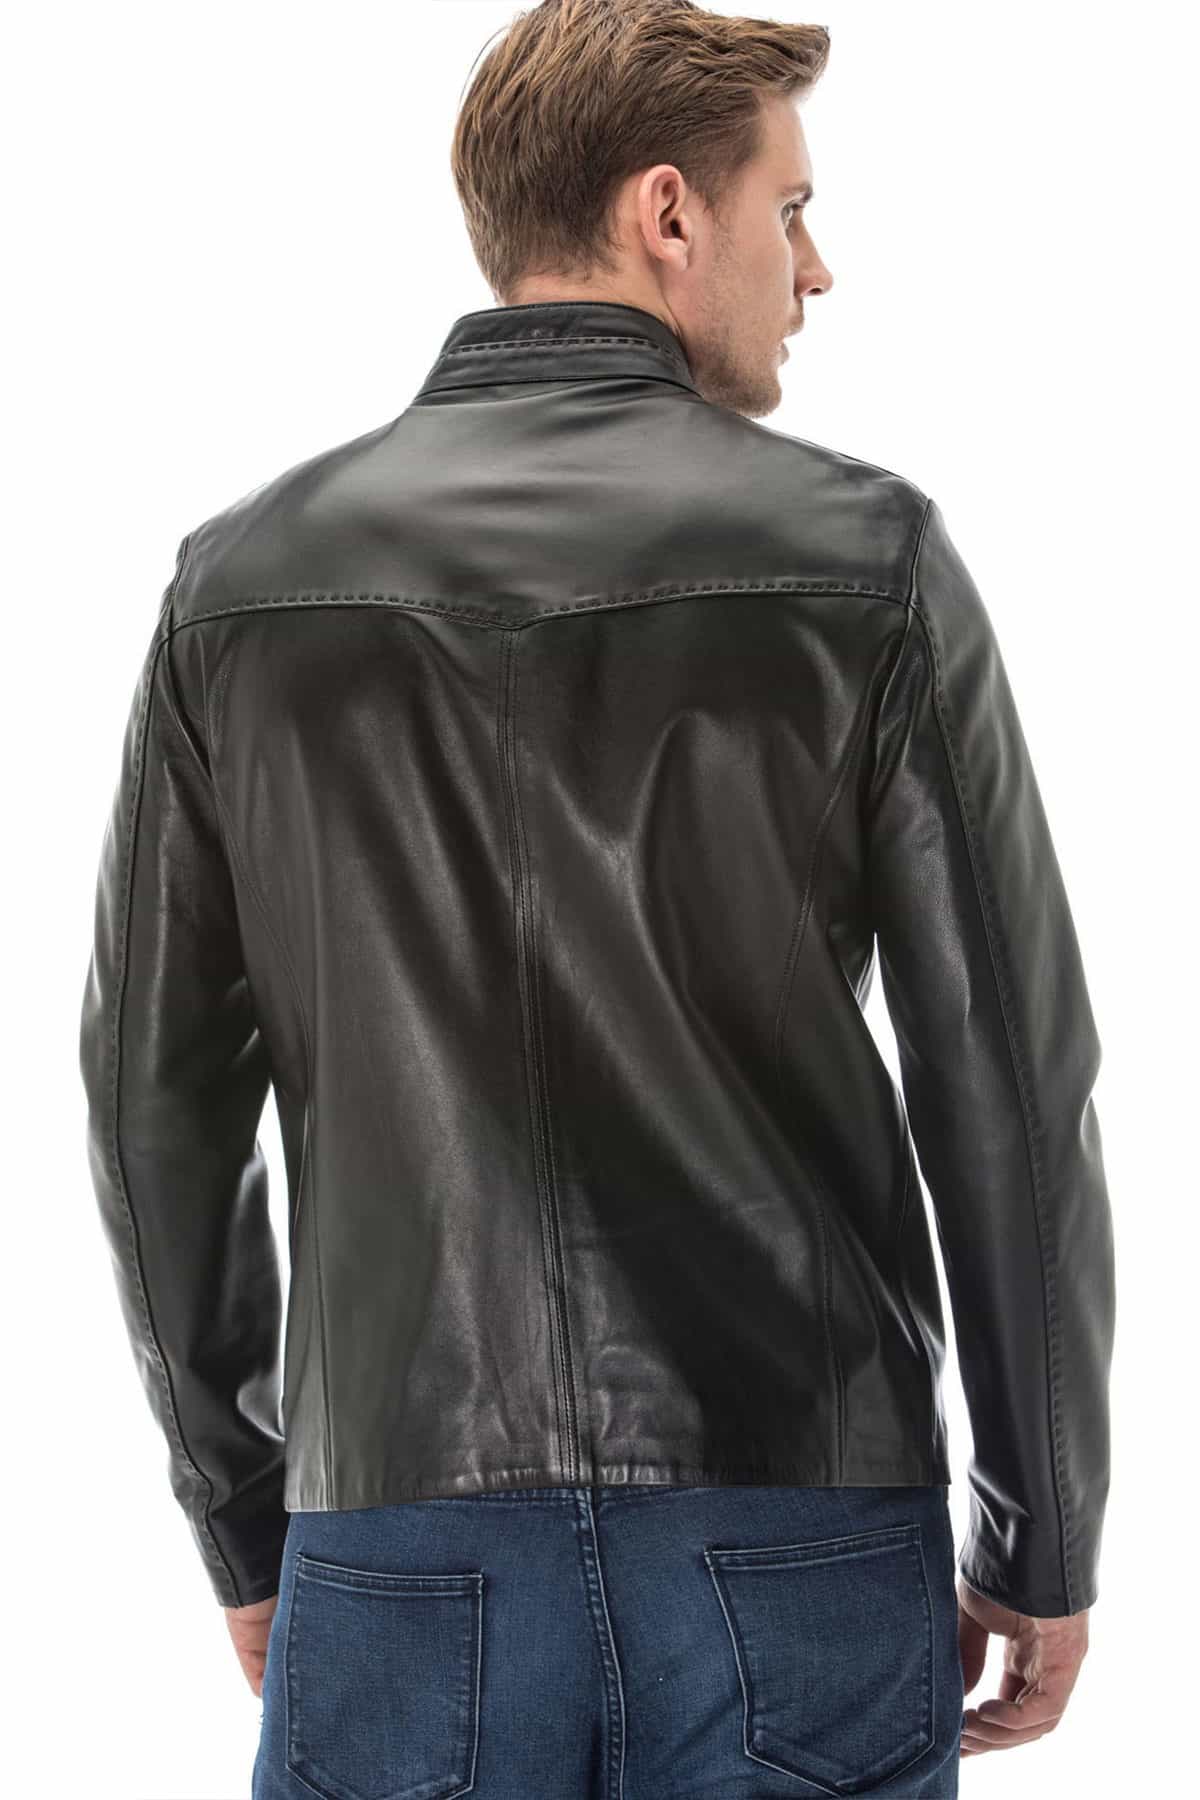 Mens Black Leather Jacket with Stitching Detail Back